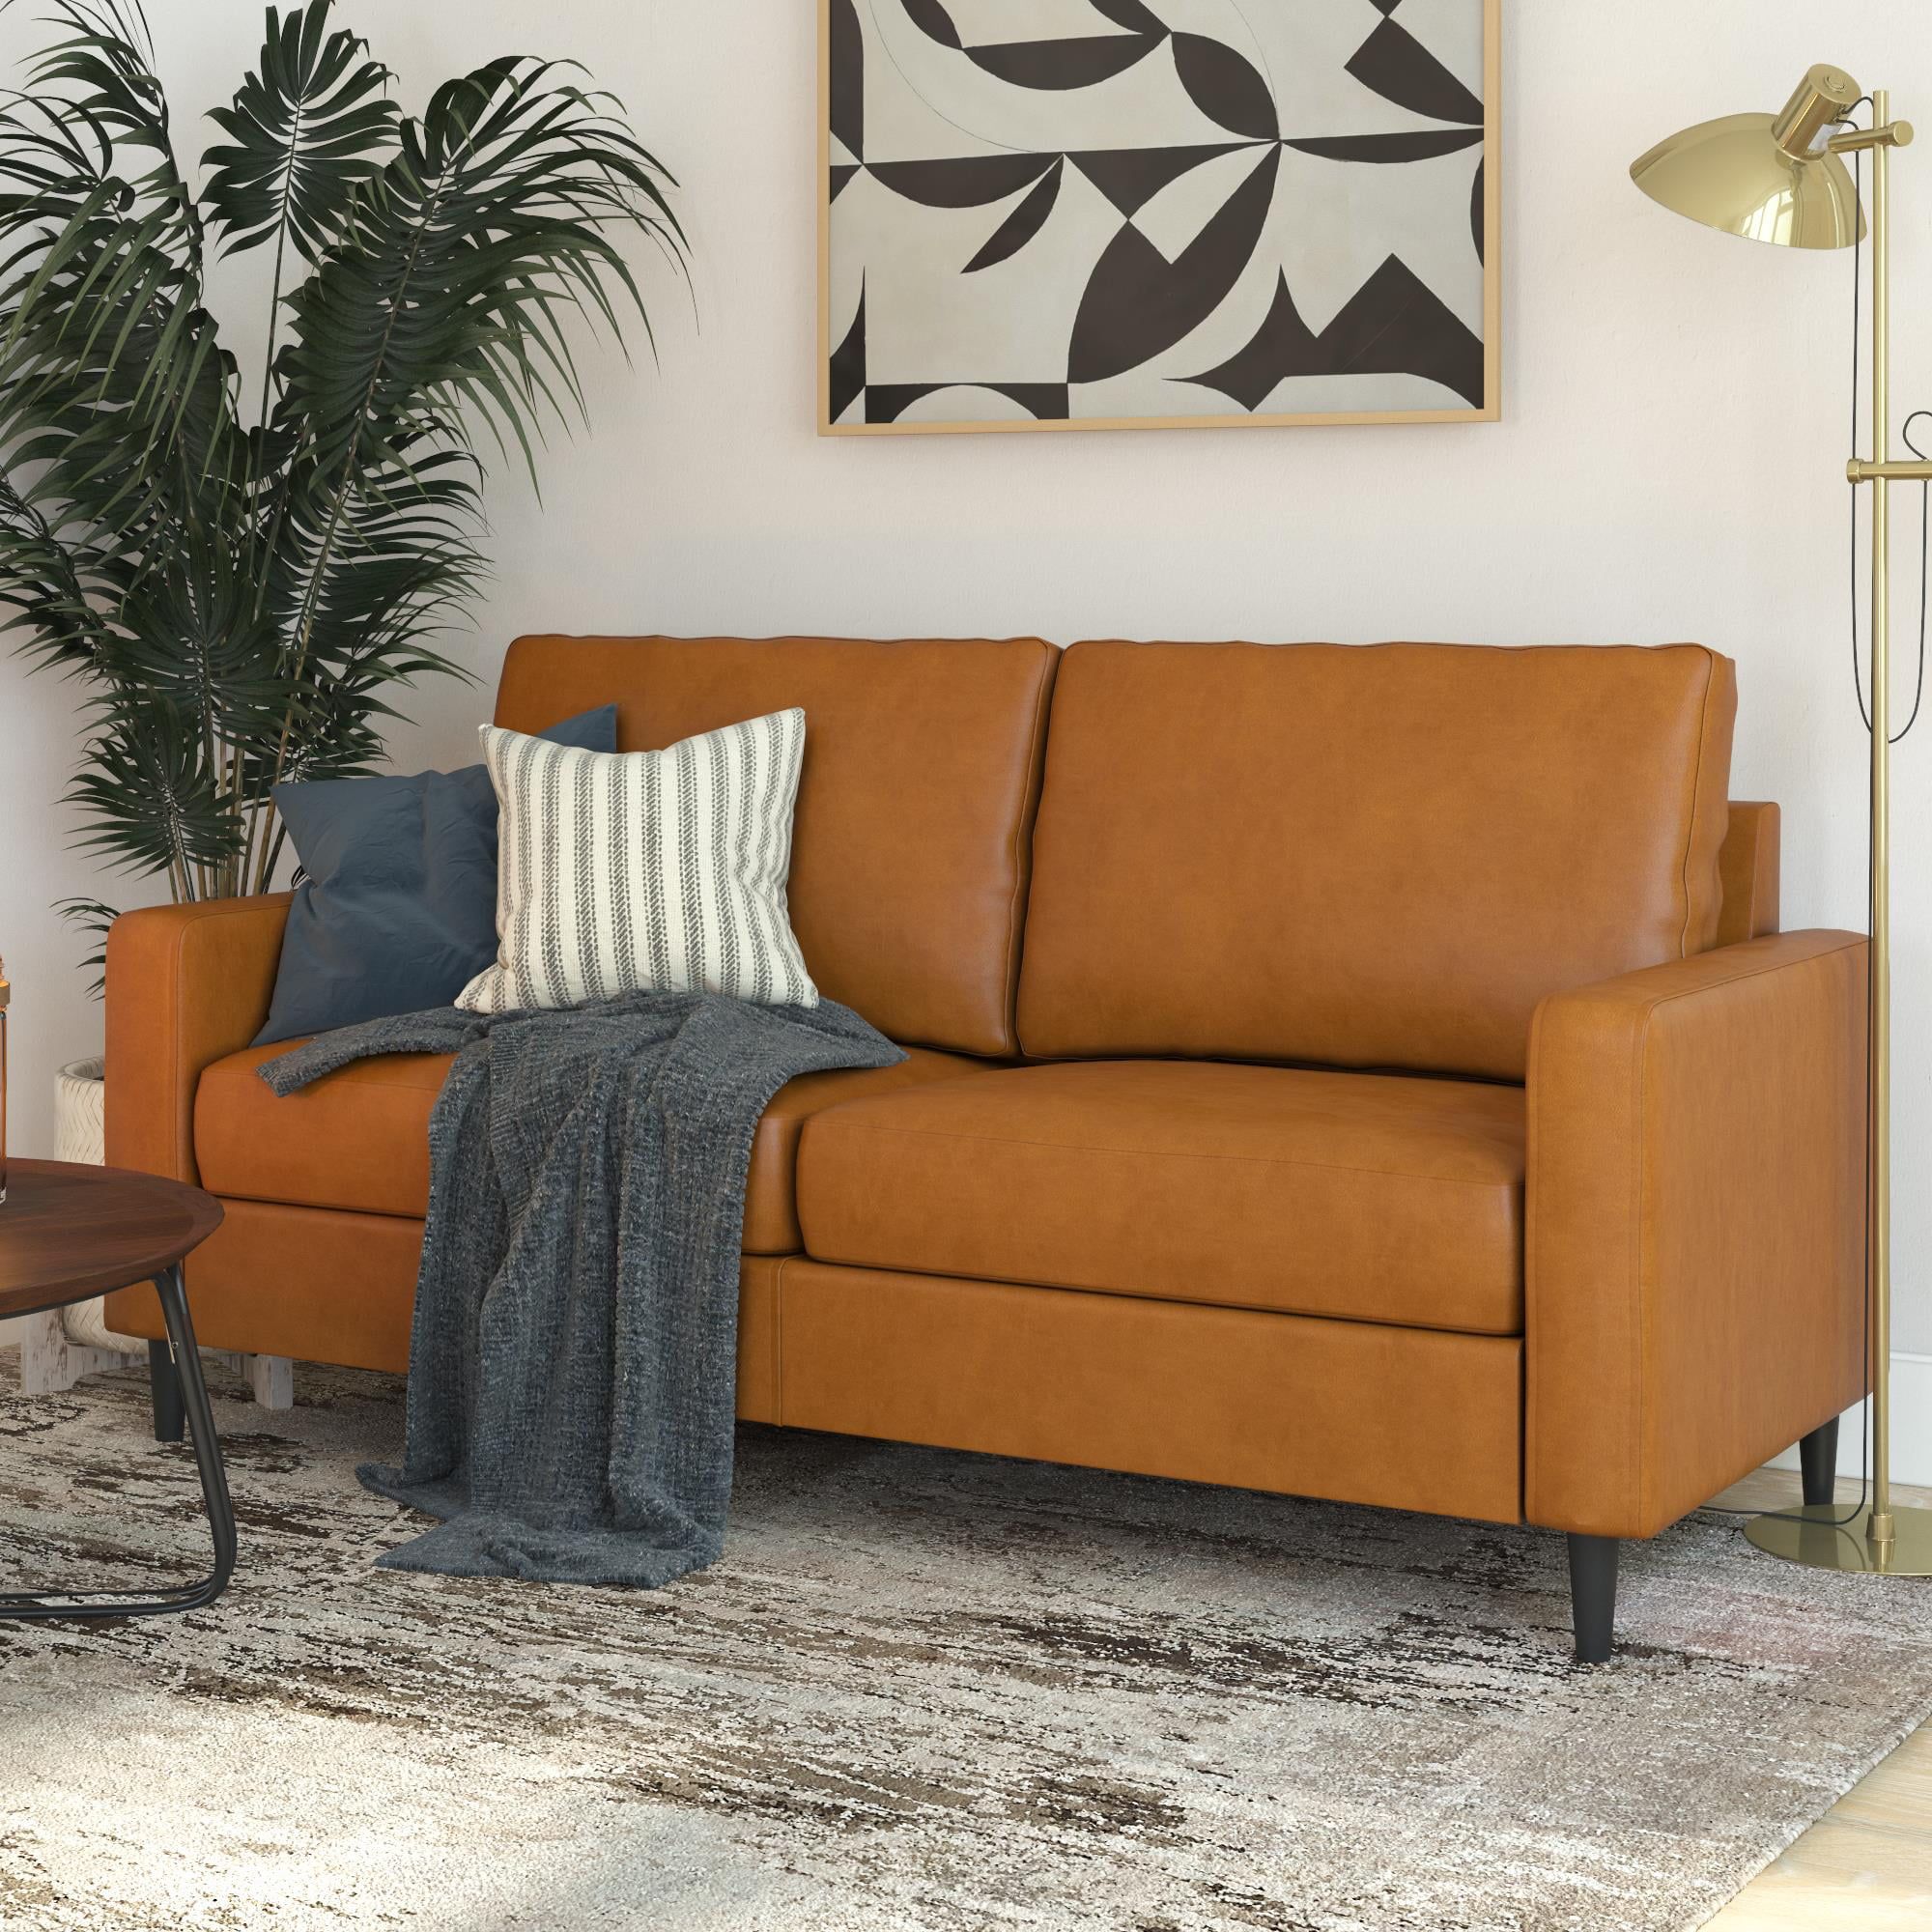 Dhp Connor Modern Sofa, Small Space Living Room Furniture, Camel Faux Throughout Faux Leather Sofas (Gallery 8 of 21)